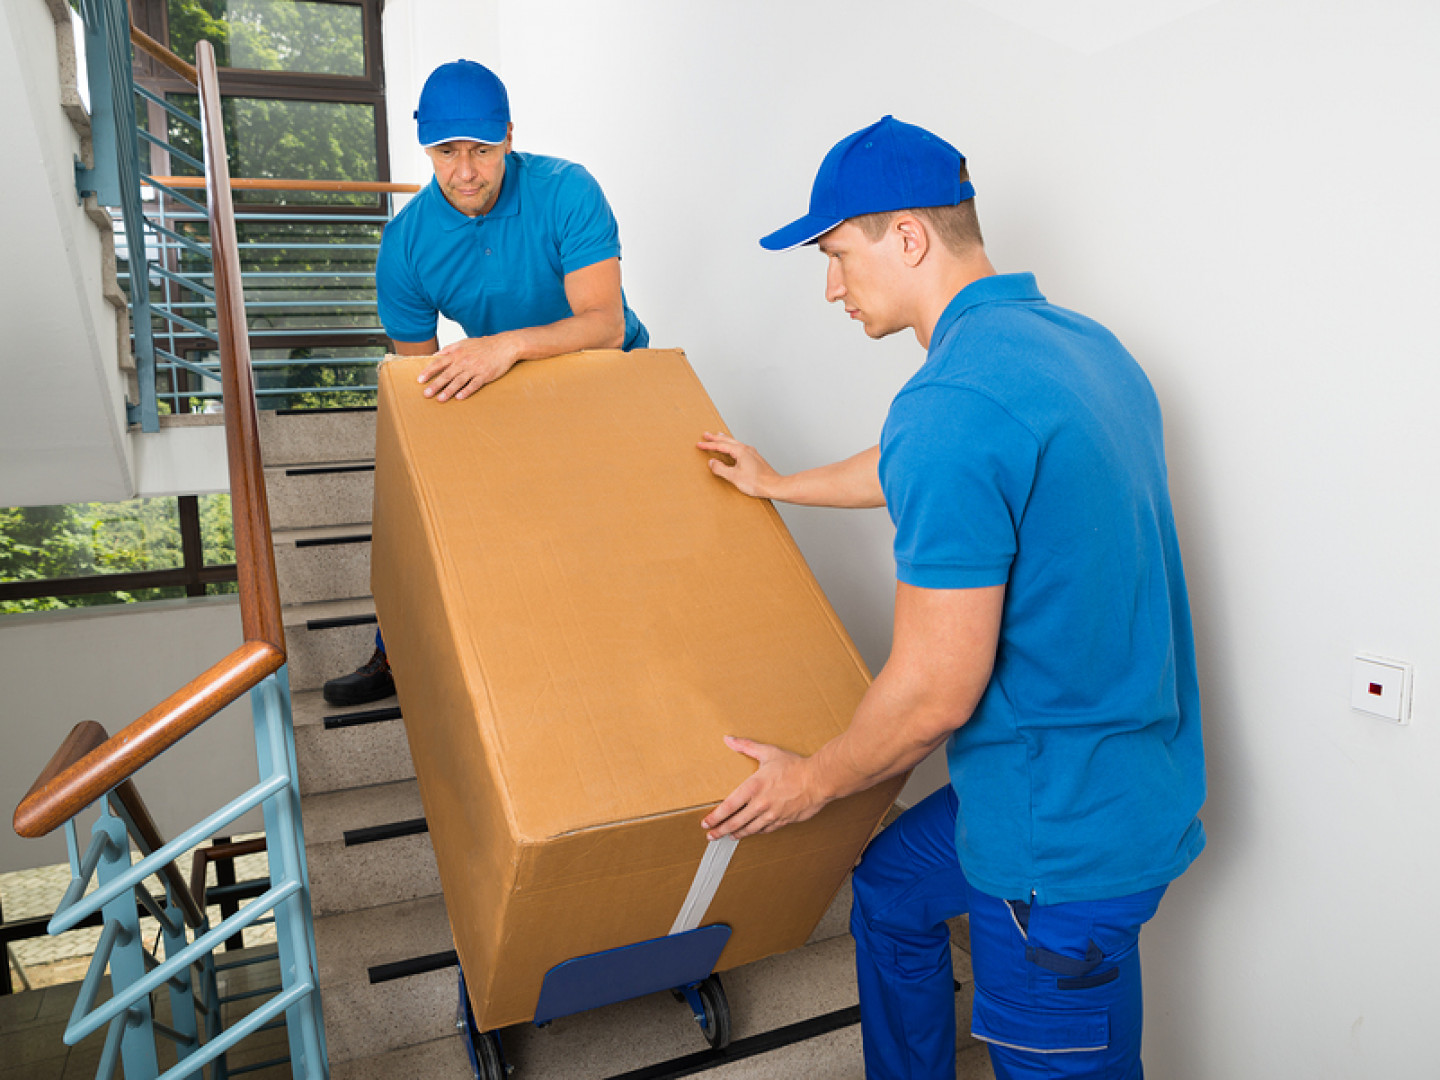 Apartment Moving Company in Longview, Tyler & Dallas, TX